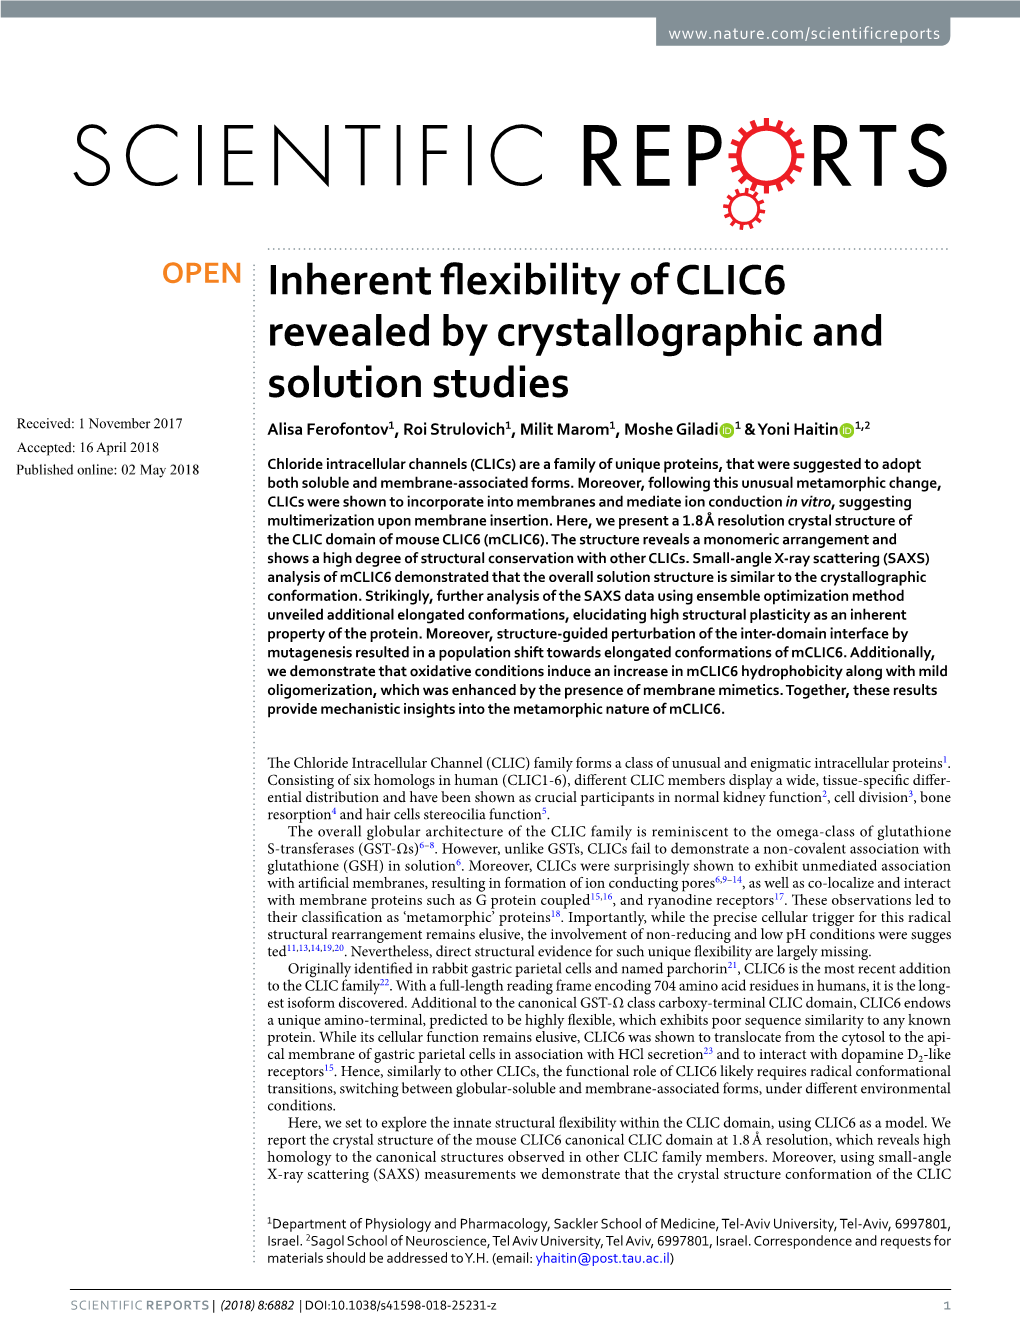 Inherent Flexibility of CLIC6 Revealed by Crystallographic and Solution Studies